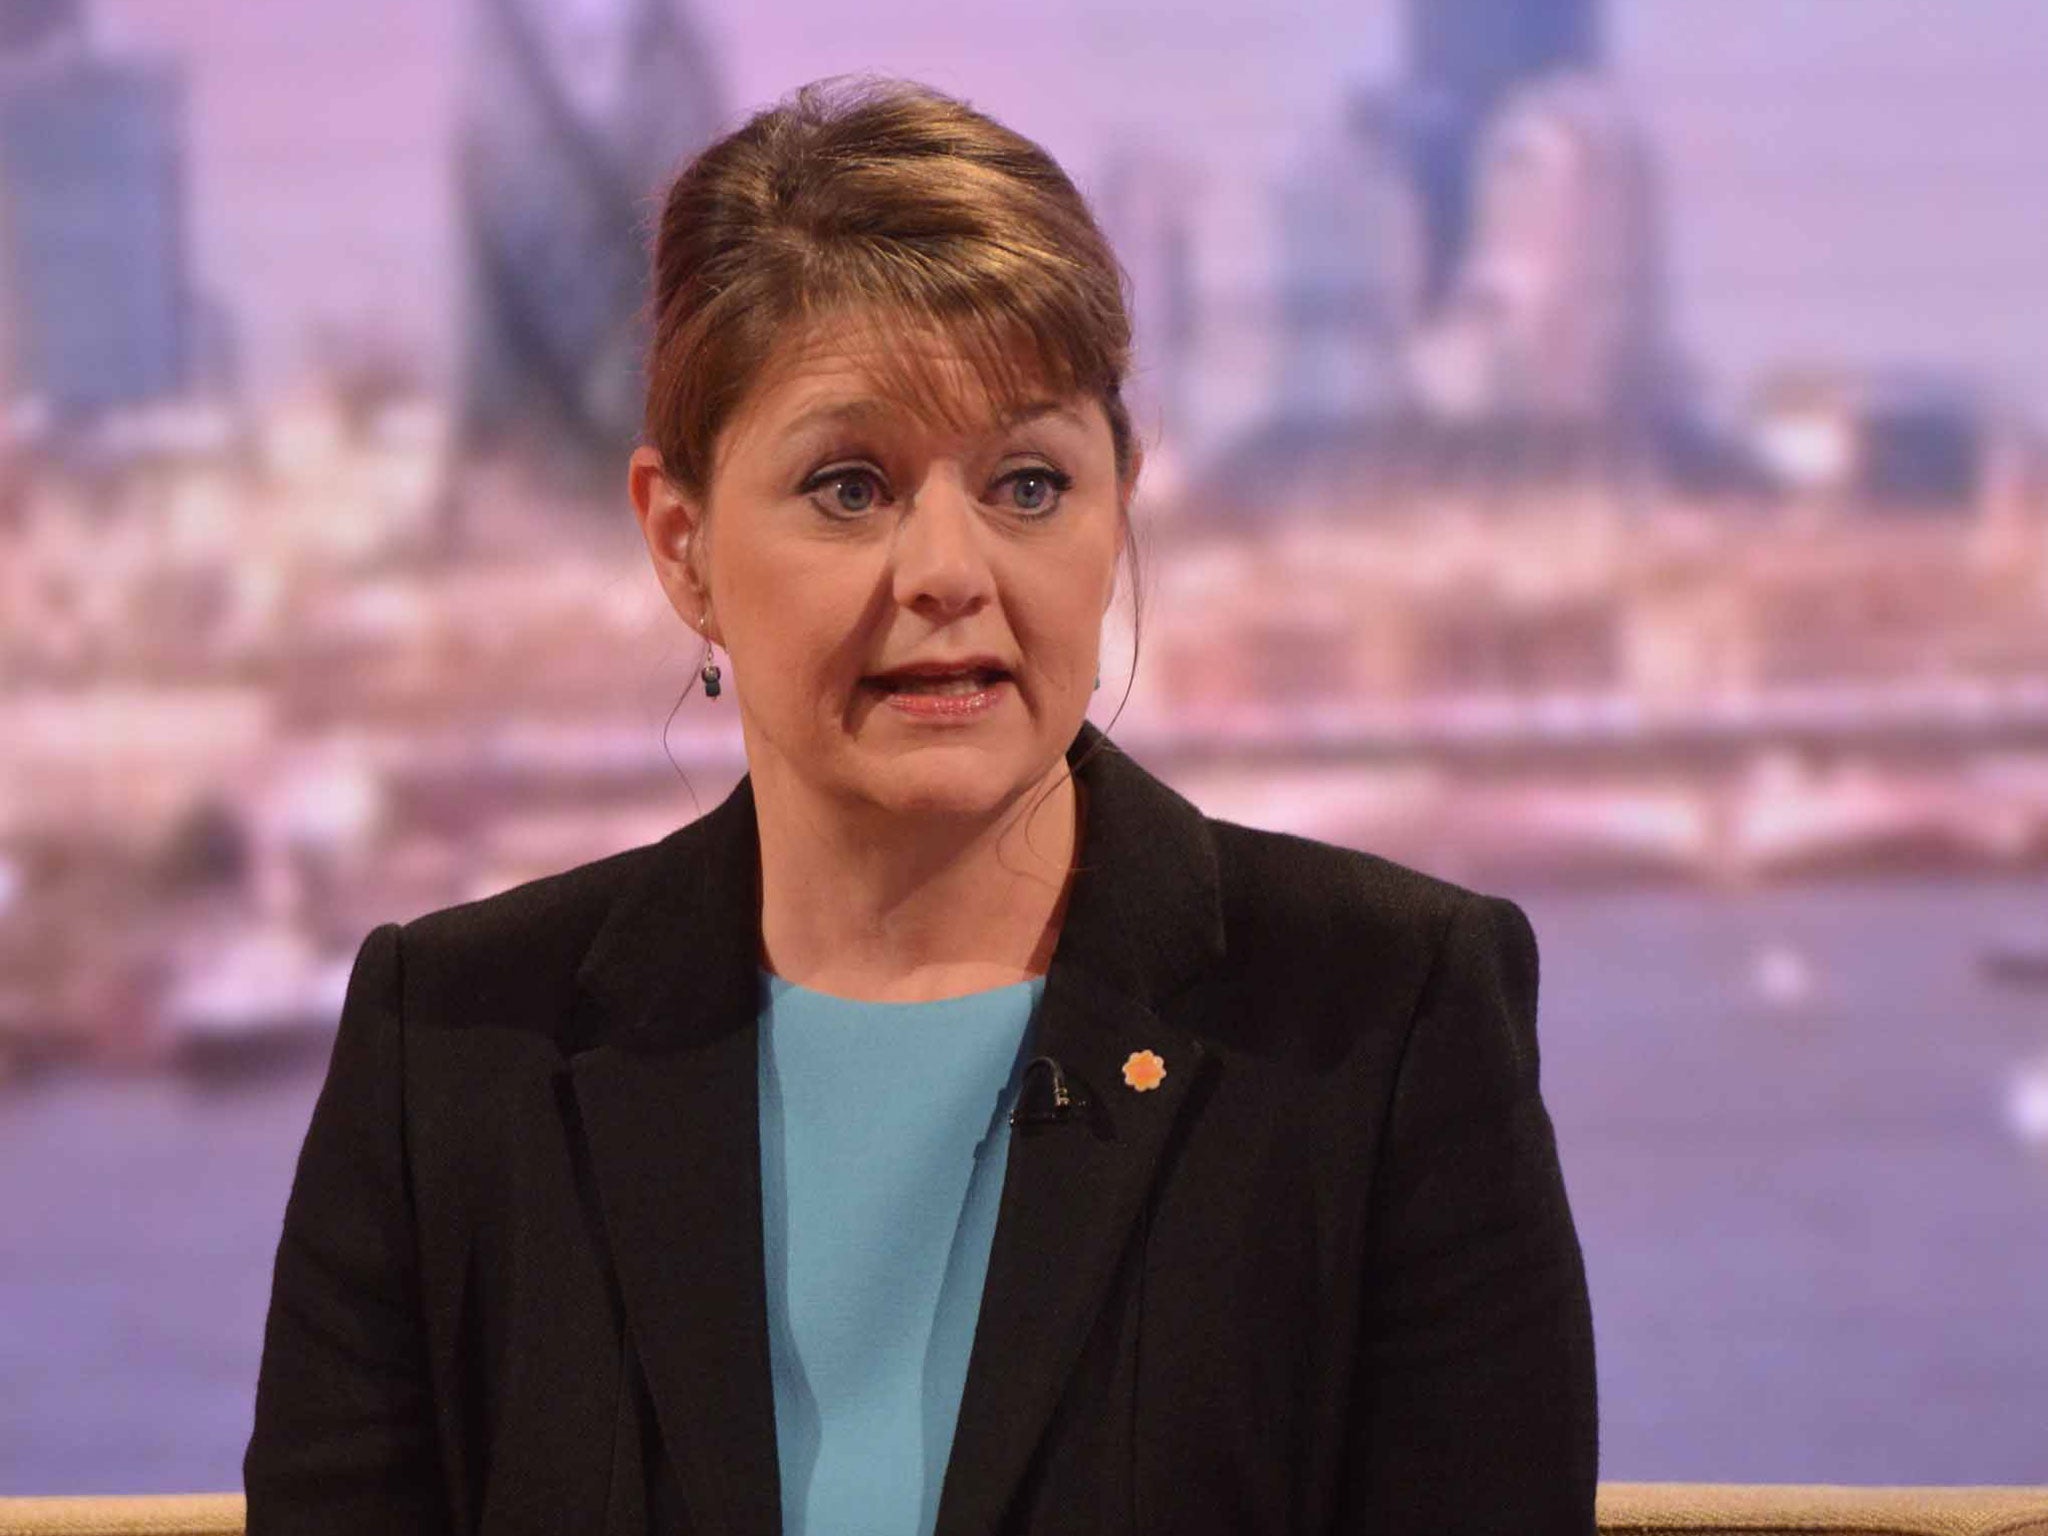 Plaid Cymru leader Leanne Wood said all four countries in the UK would have to agree to a EU pull-out